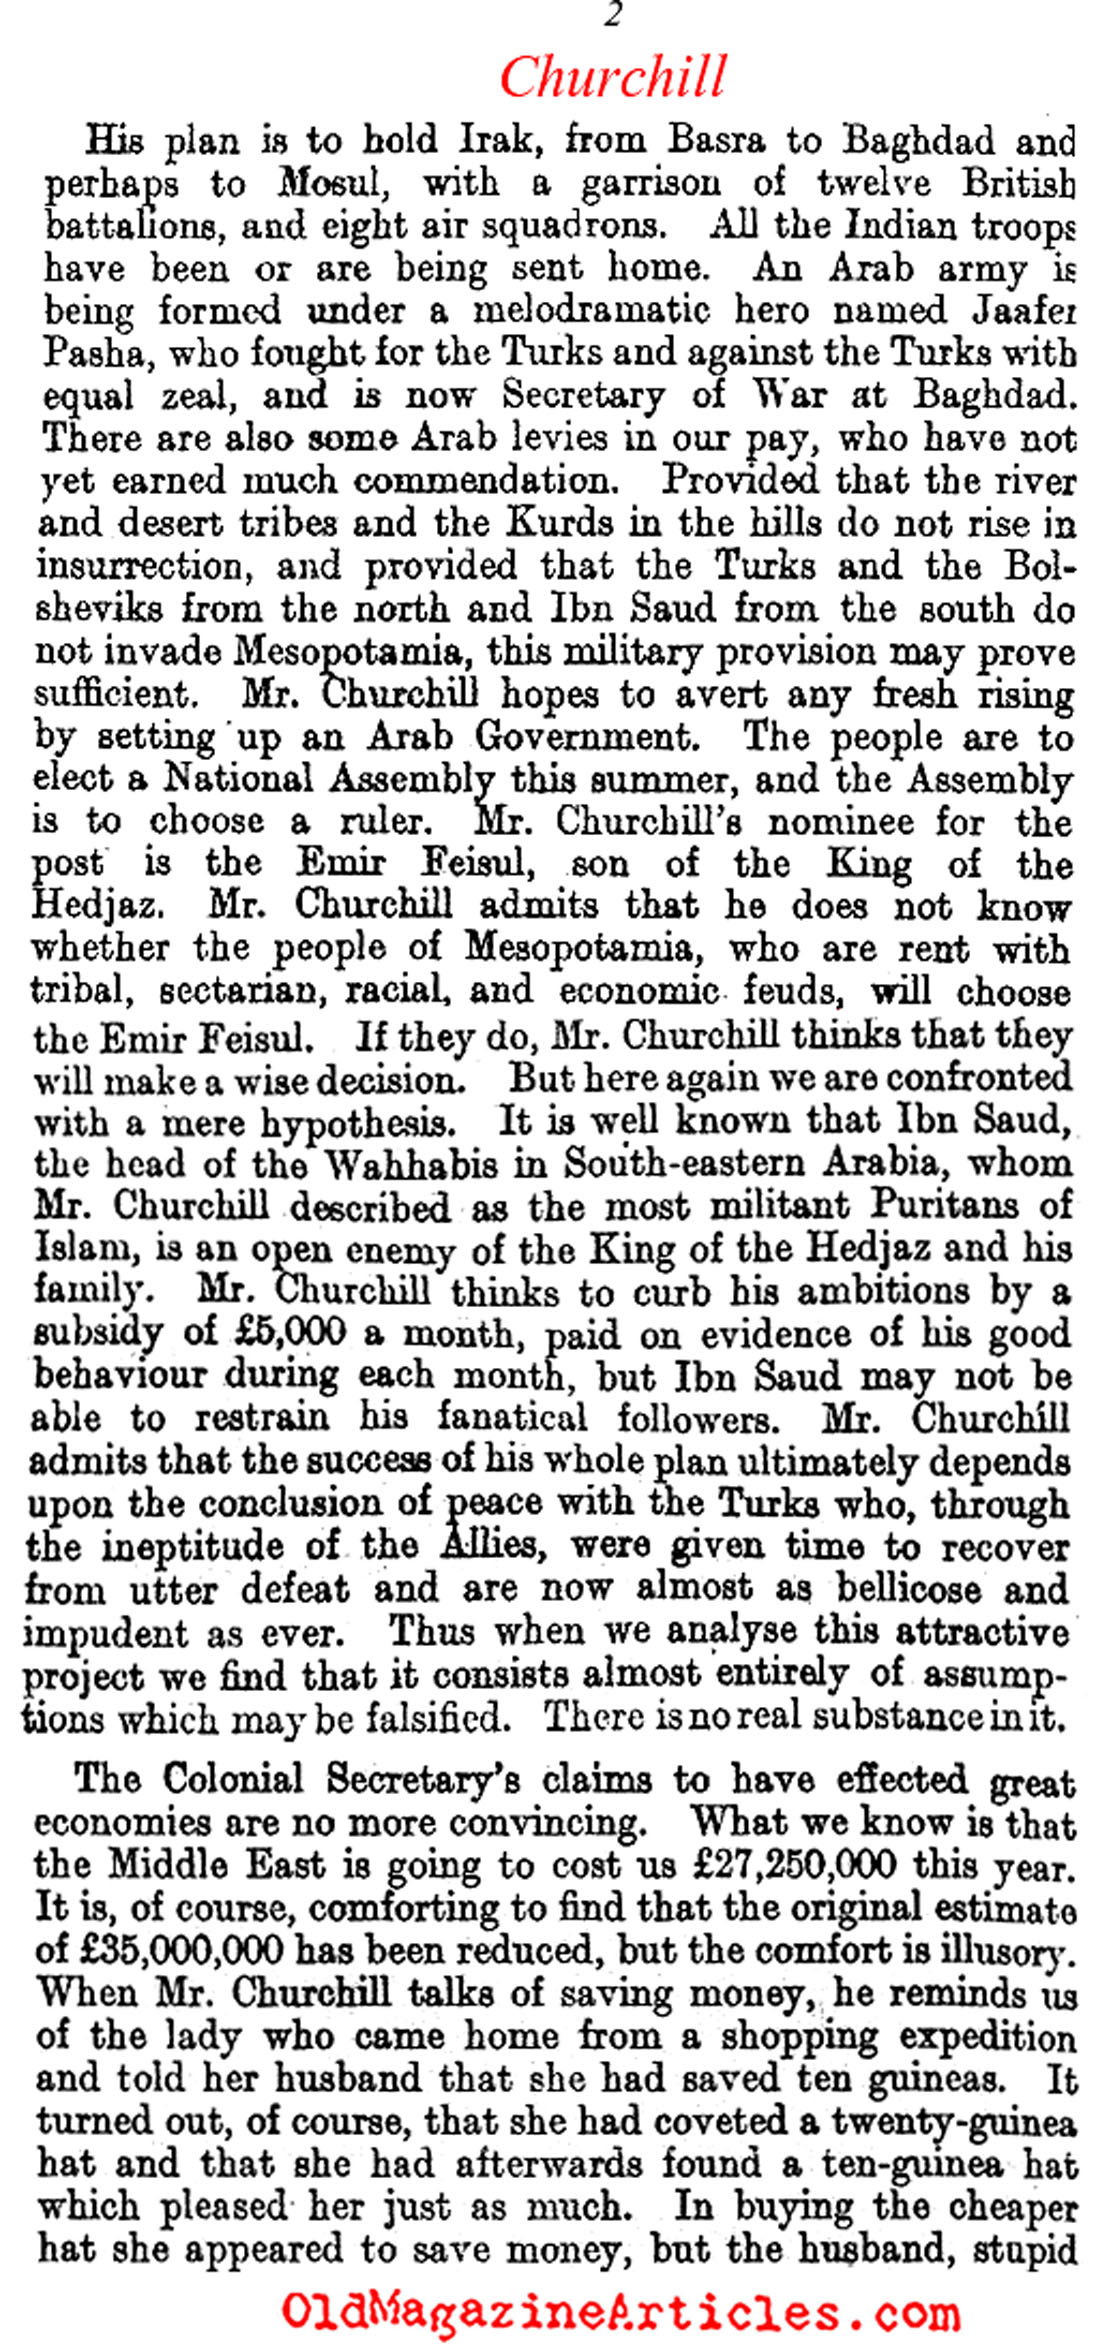 Winston Churchill and the Mesopotamia Occupation   (The Spectator, 1921)